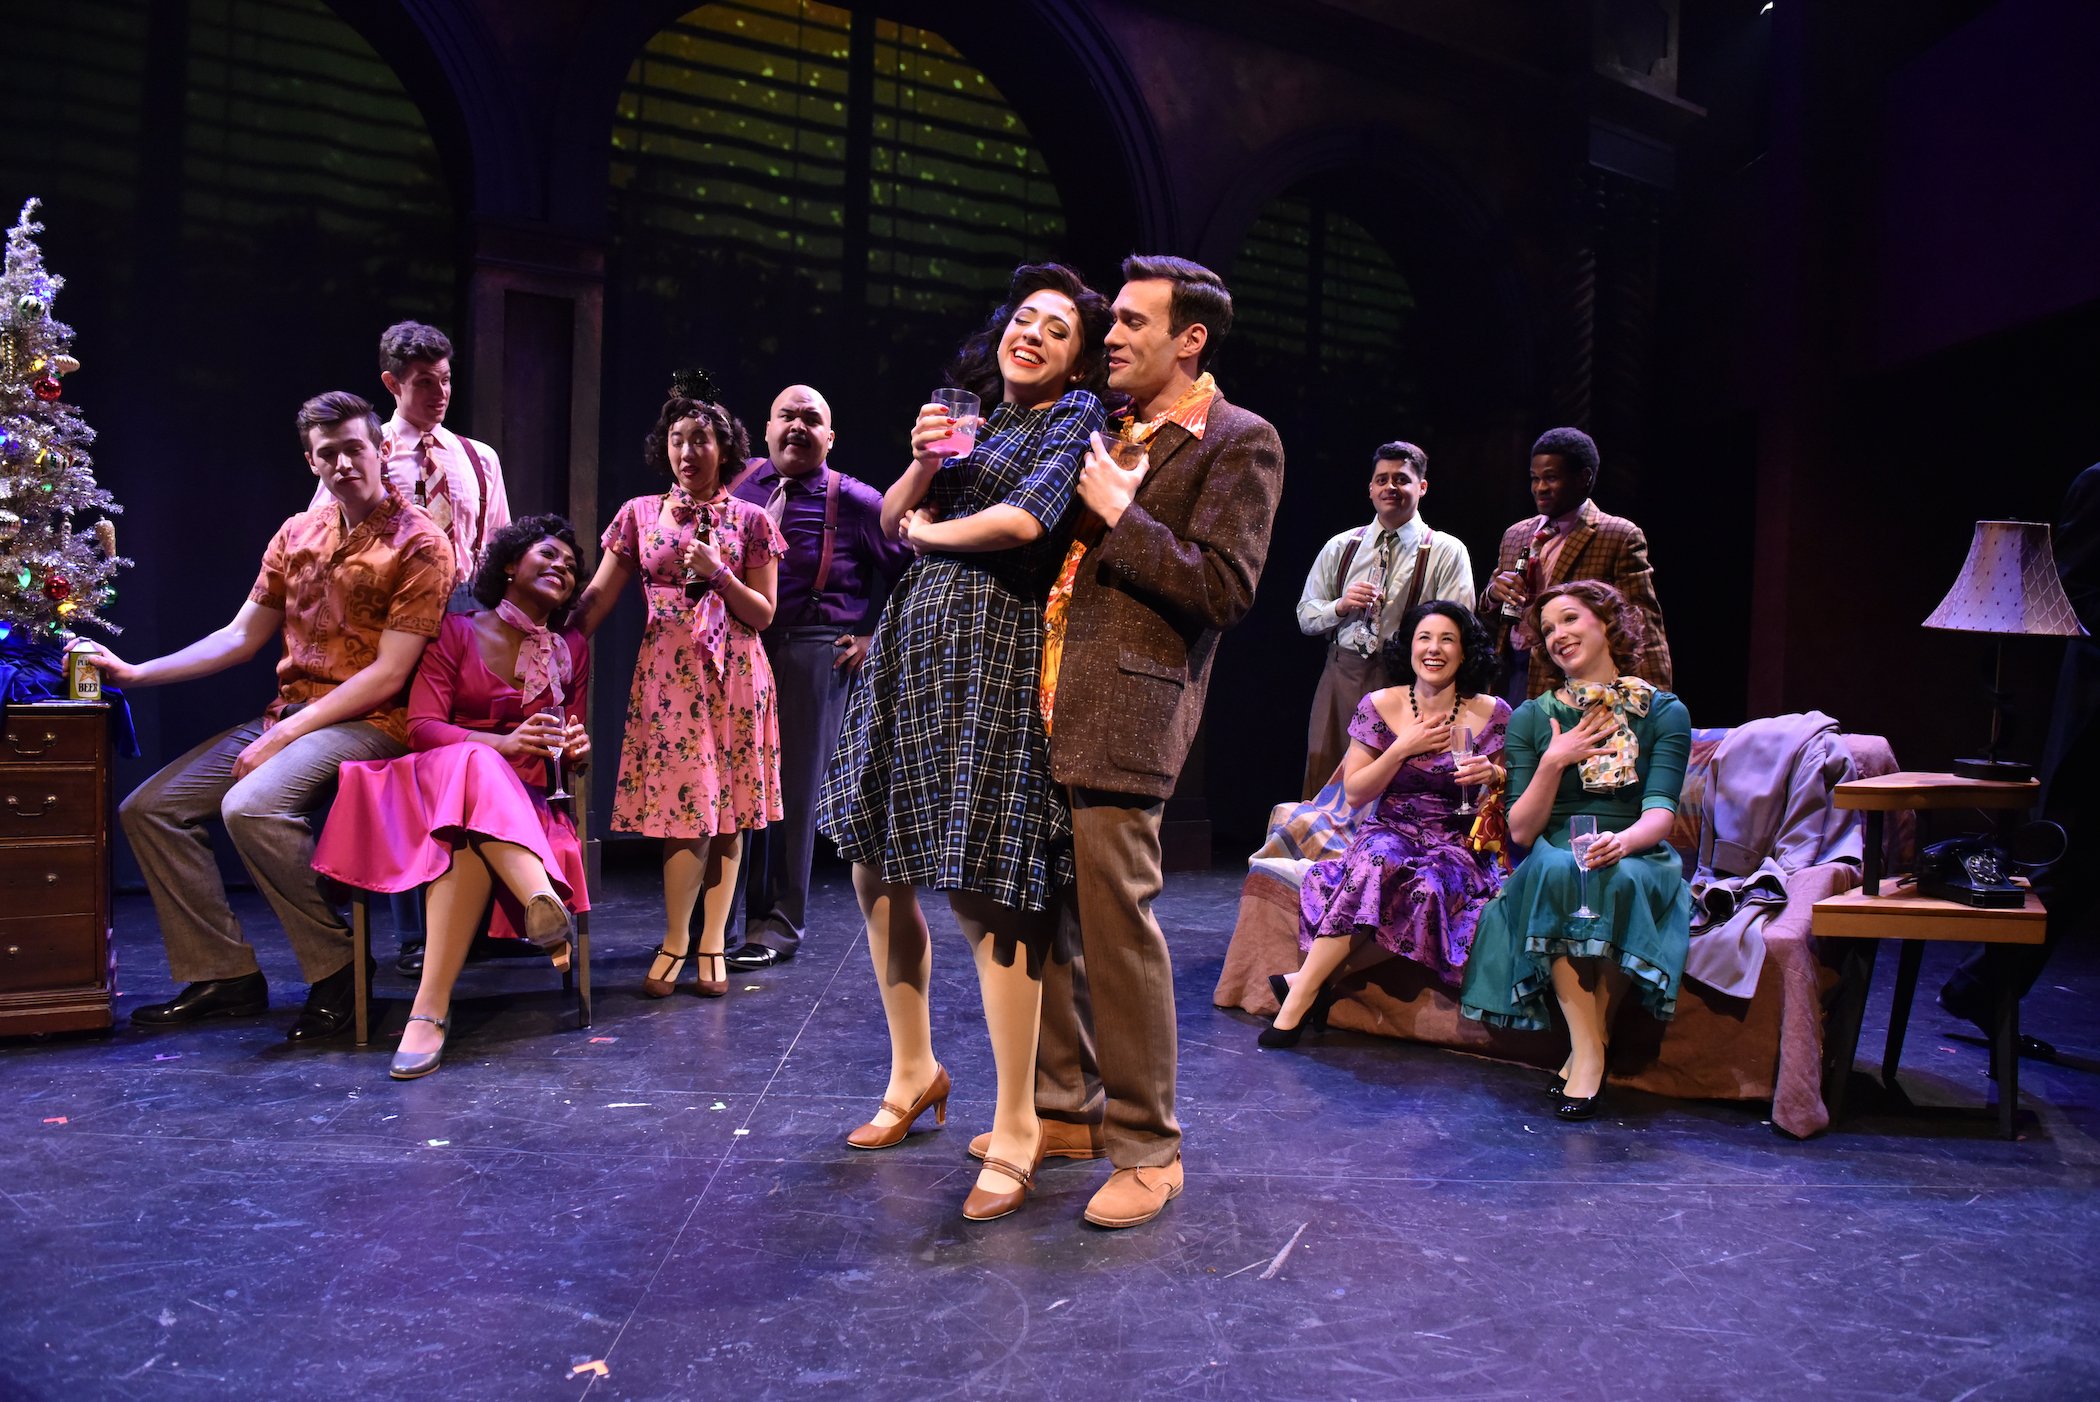 Michelle Lauto as Betty Schaefer and Joe Giovannetti as Artie Green and members of the SUNSET BOULEVARD cast from Porchlight Music Theatre  .jpeg